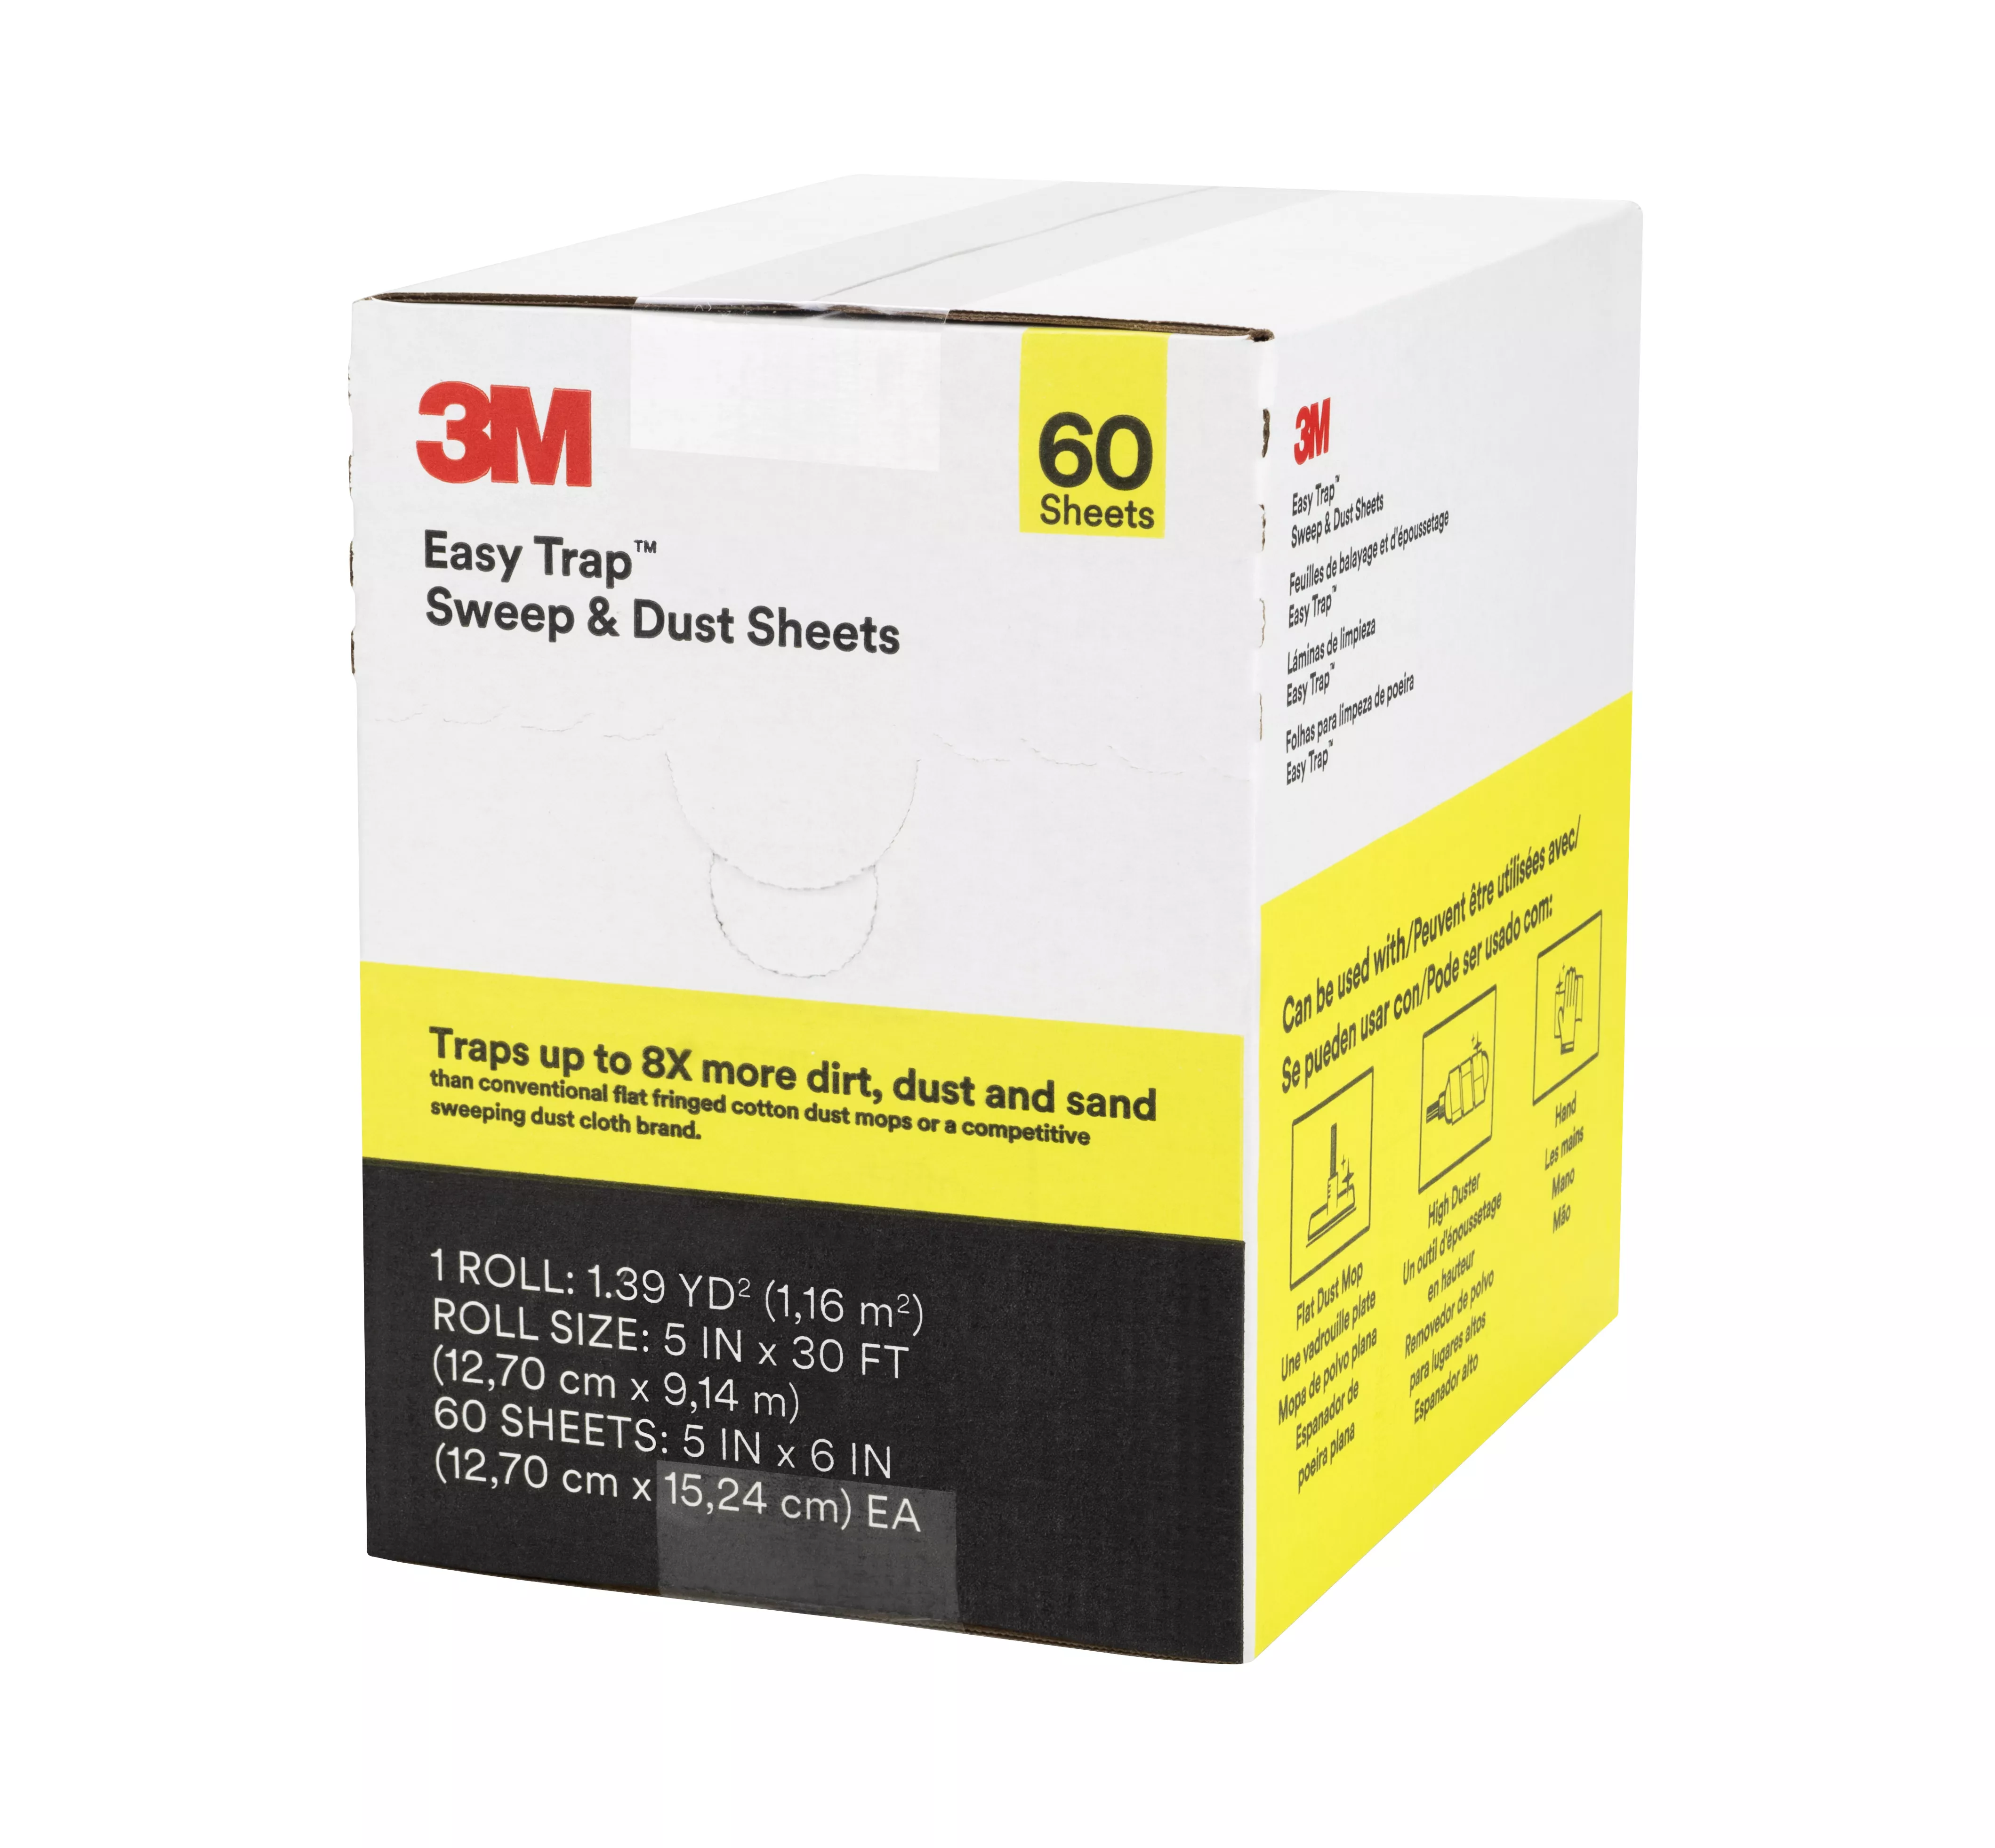 3M™ Easy Trap™ Sweep & Dust Sheets, 5 in x 6 in, 60 Sheets/Roll, 8
Rolls/Case